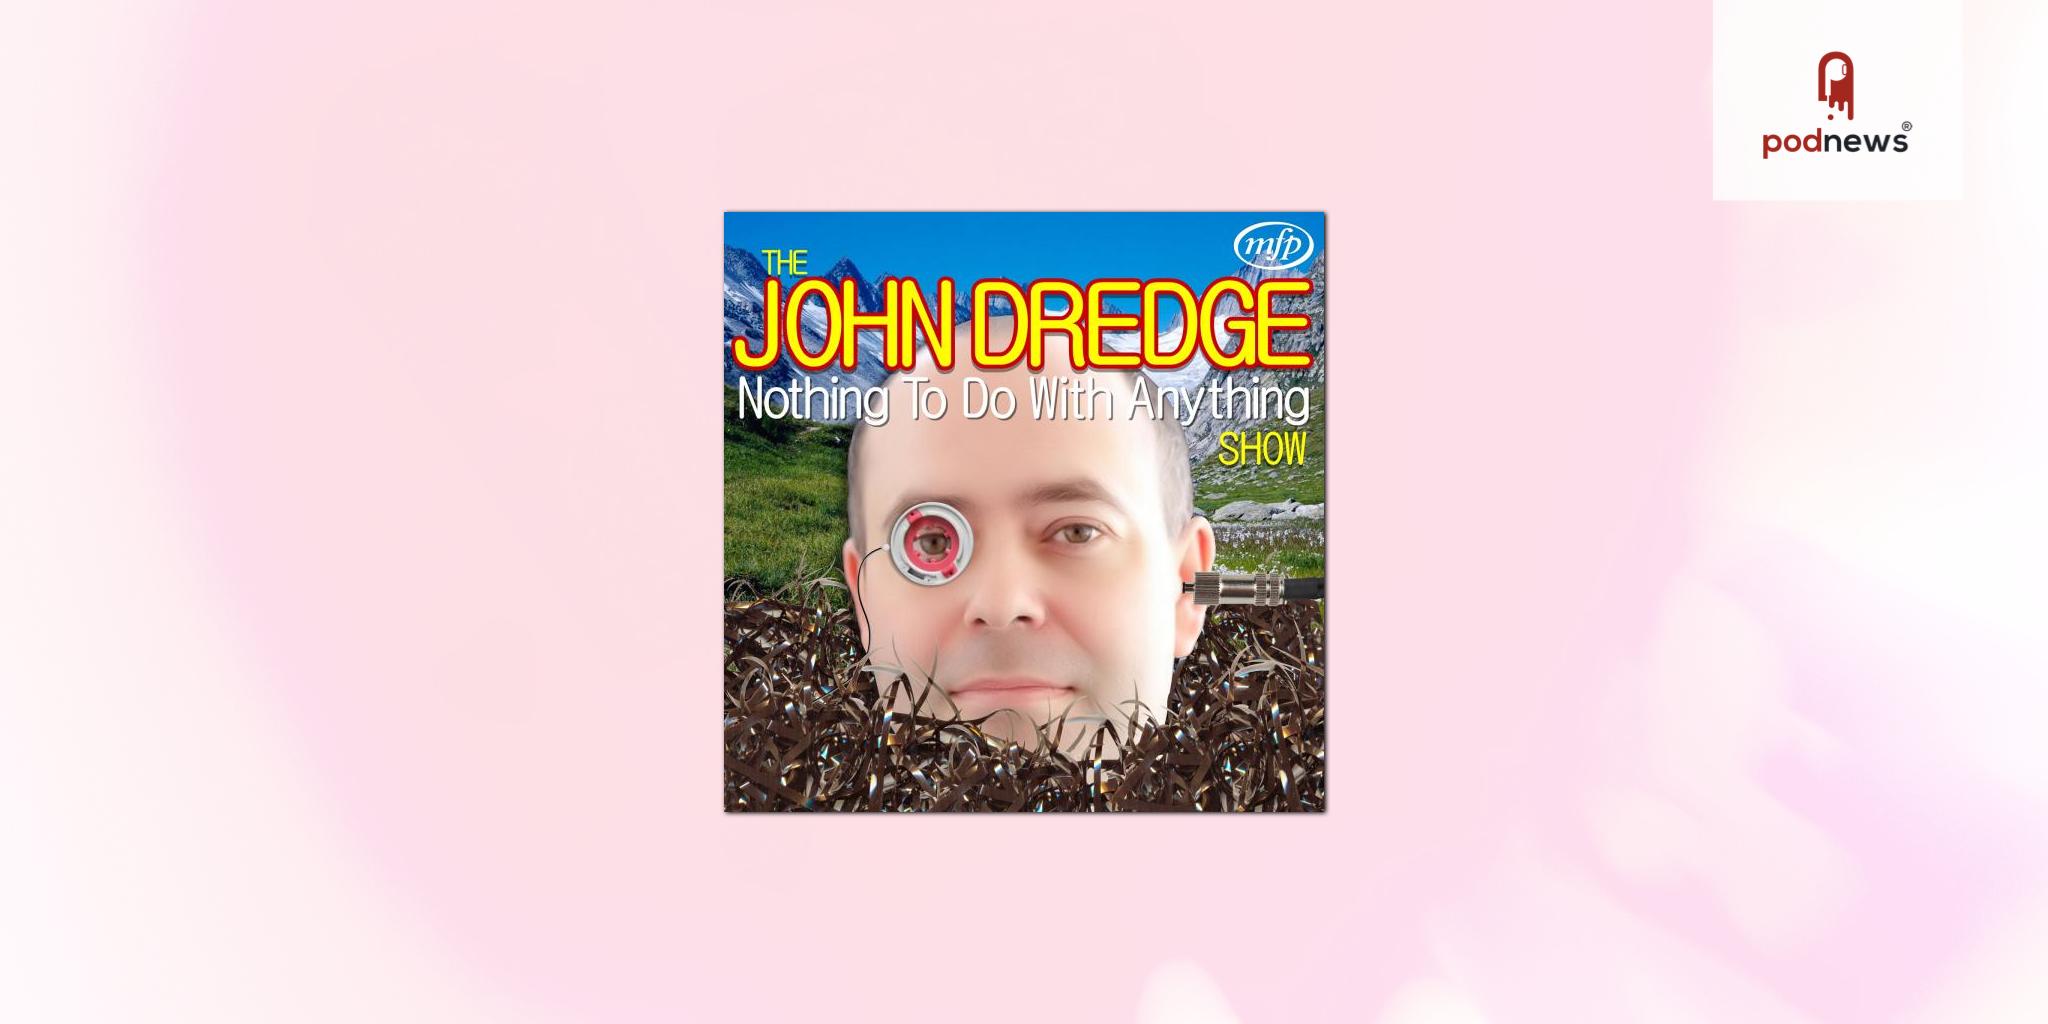 The John Dredge Nothing To Do With Anything Show is back